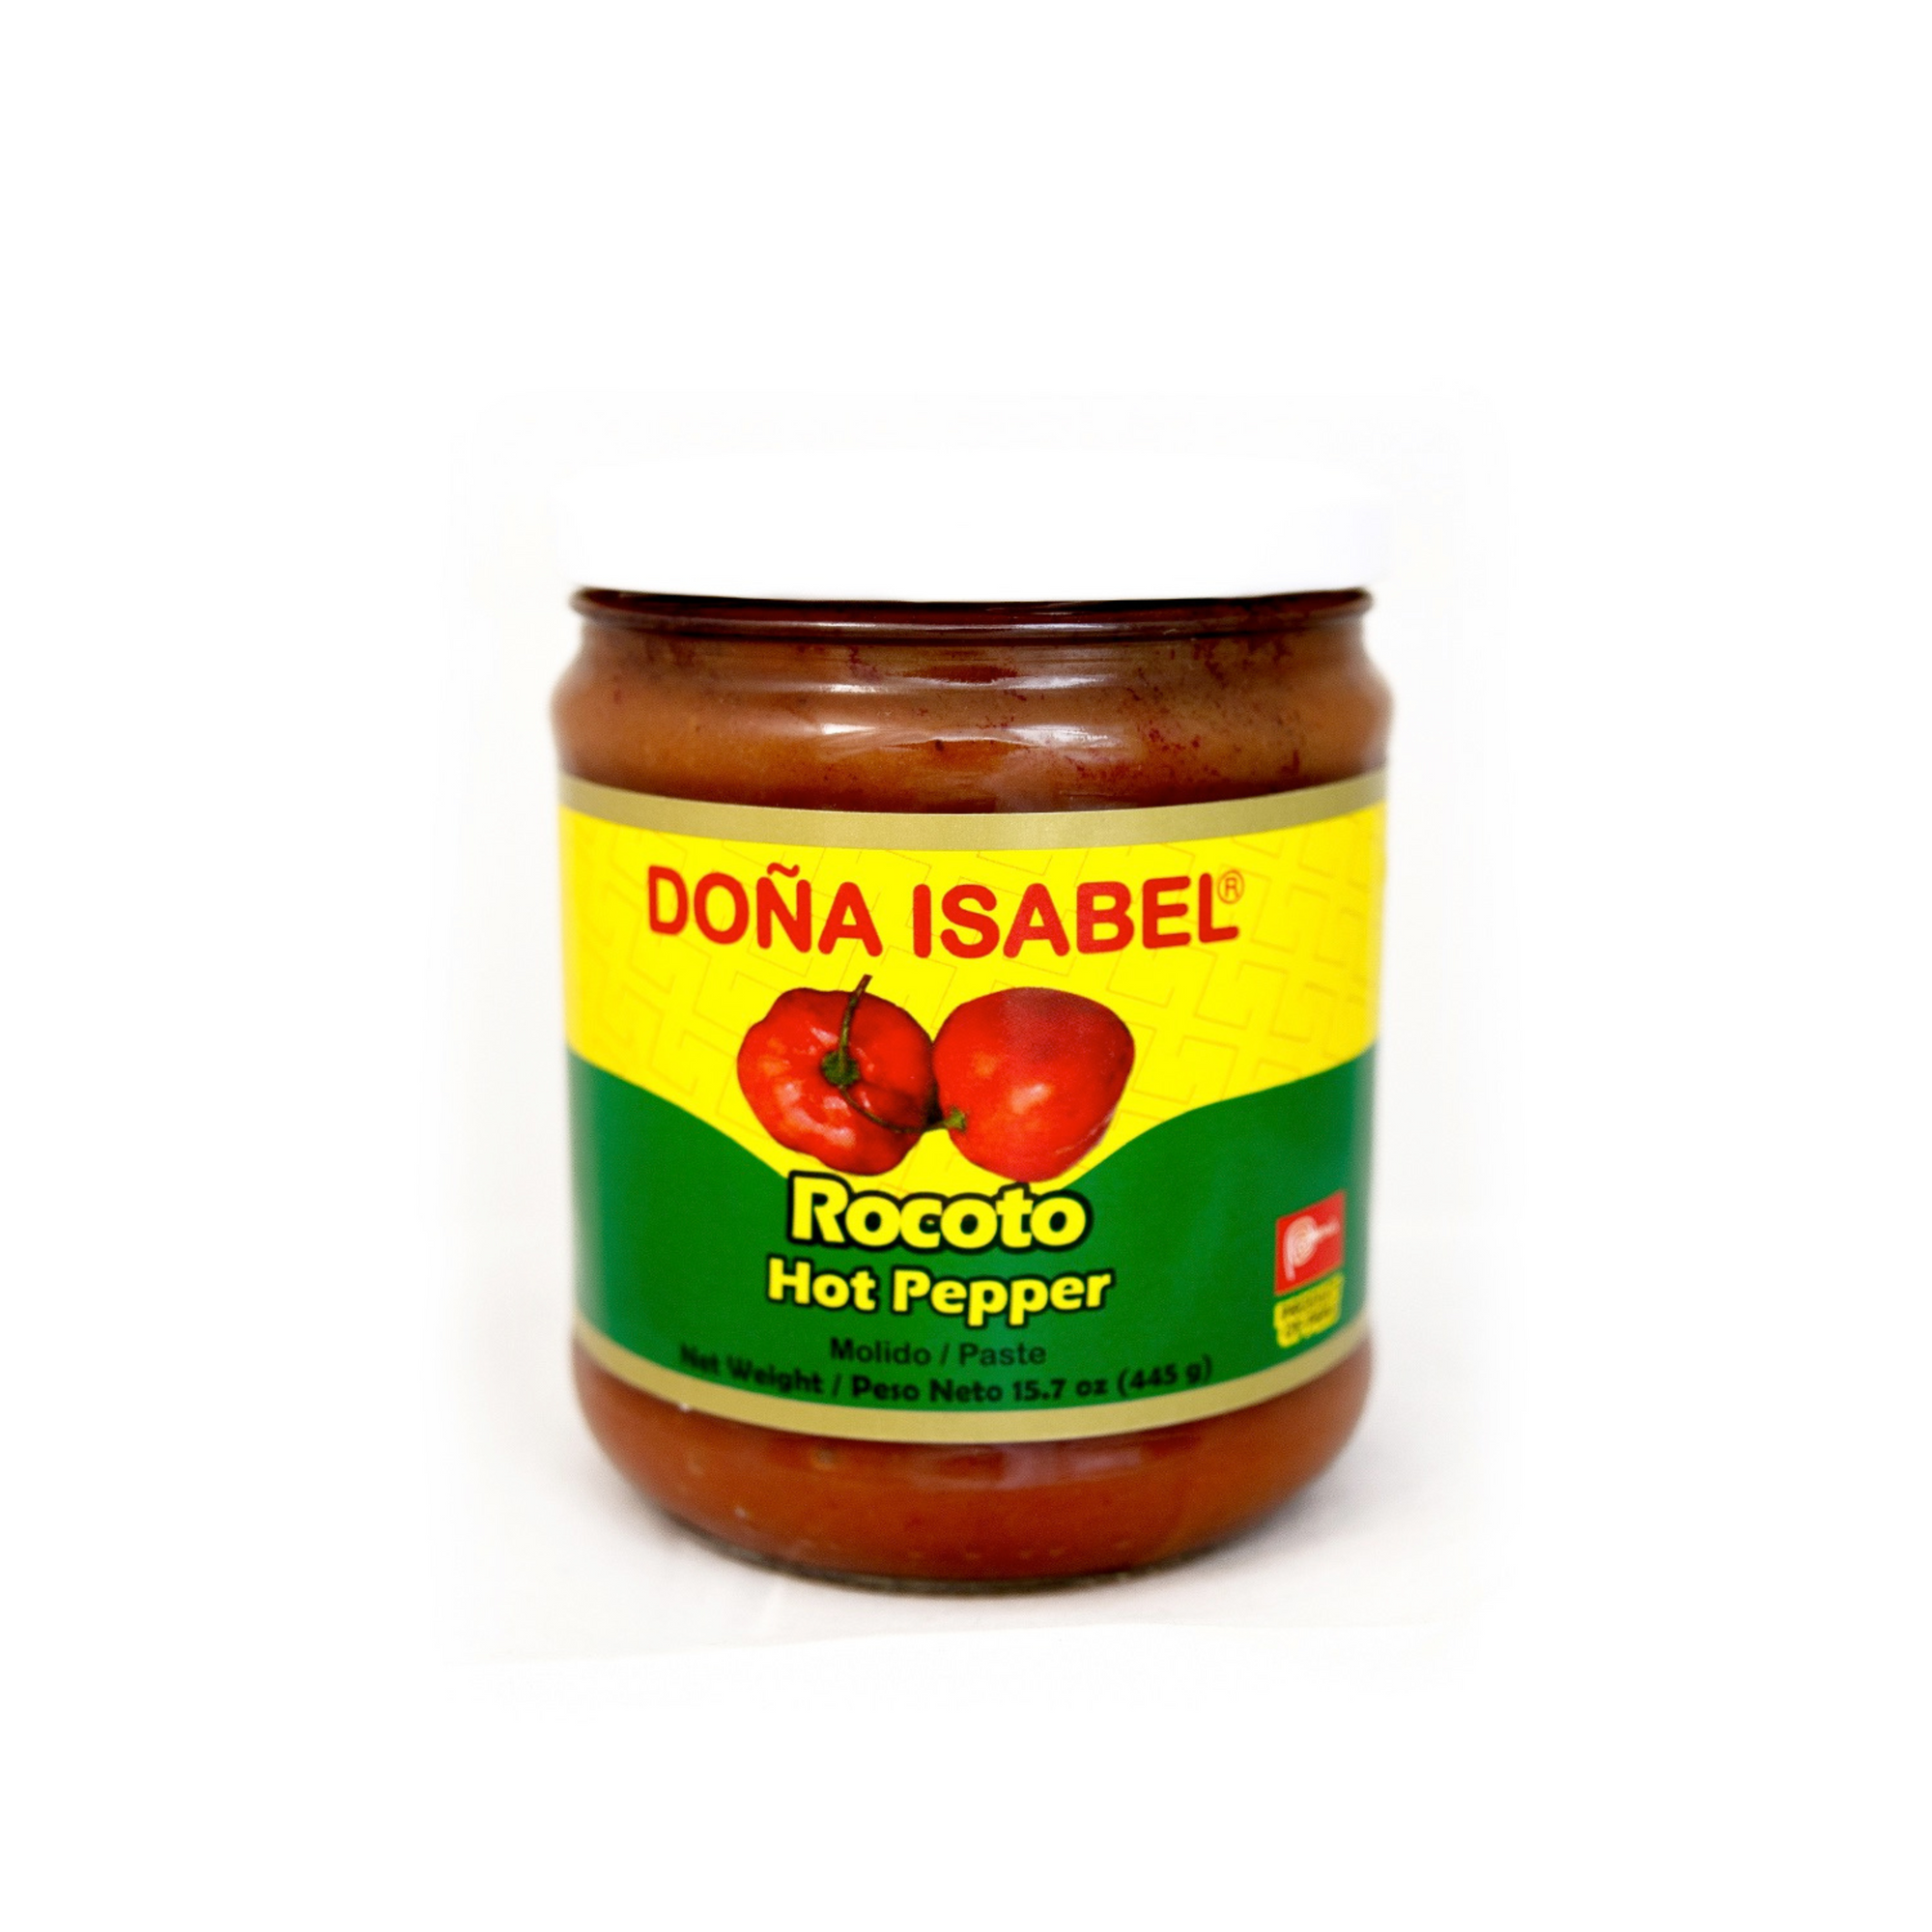 Doña Isabel Rocoto Red Hot Pepper x 15.7 oz.